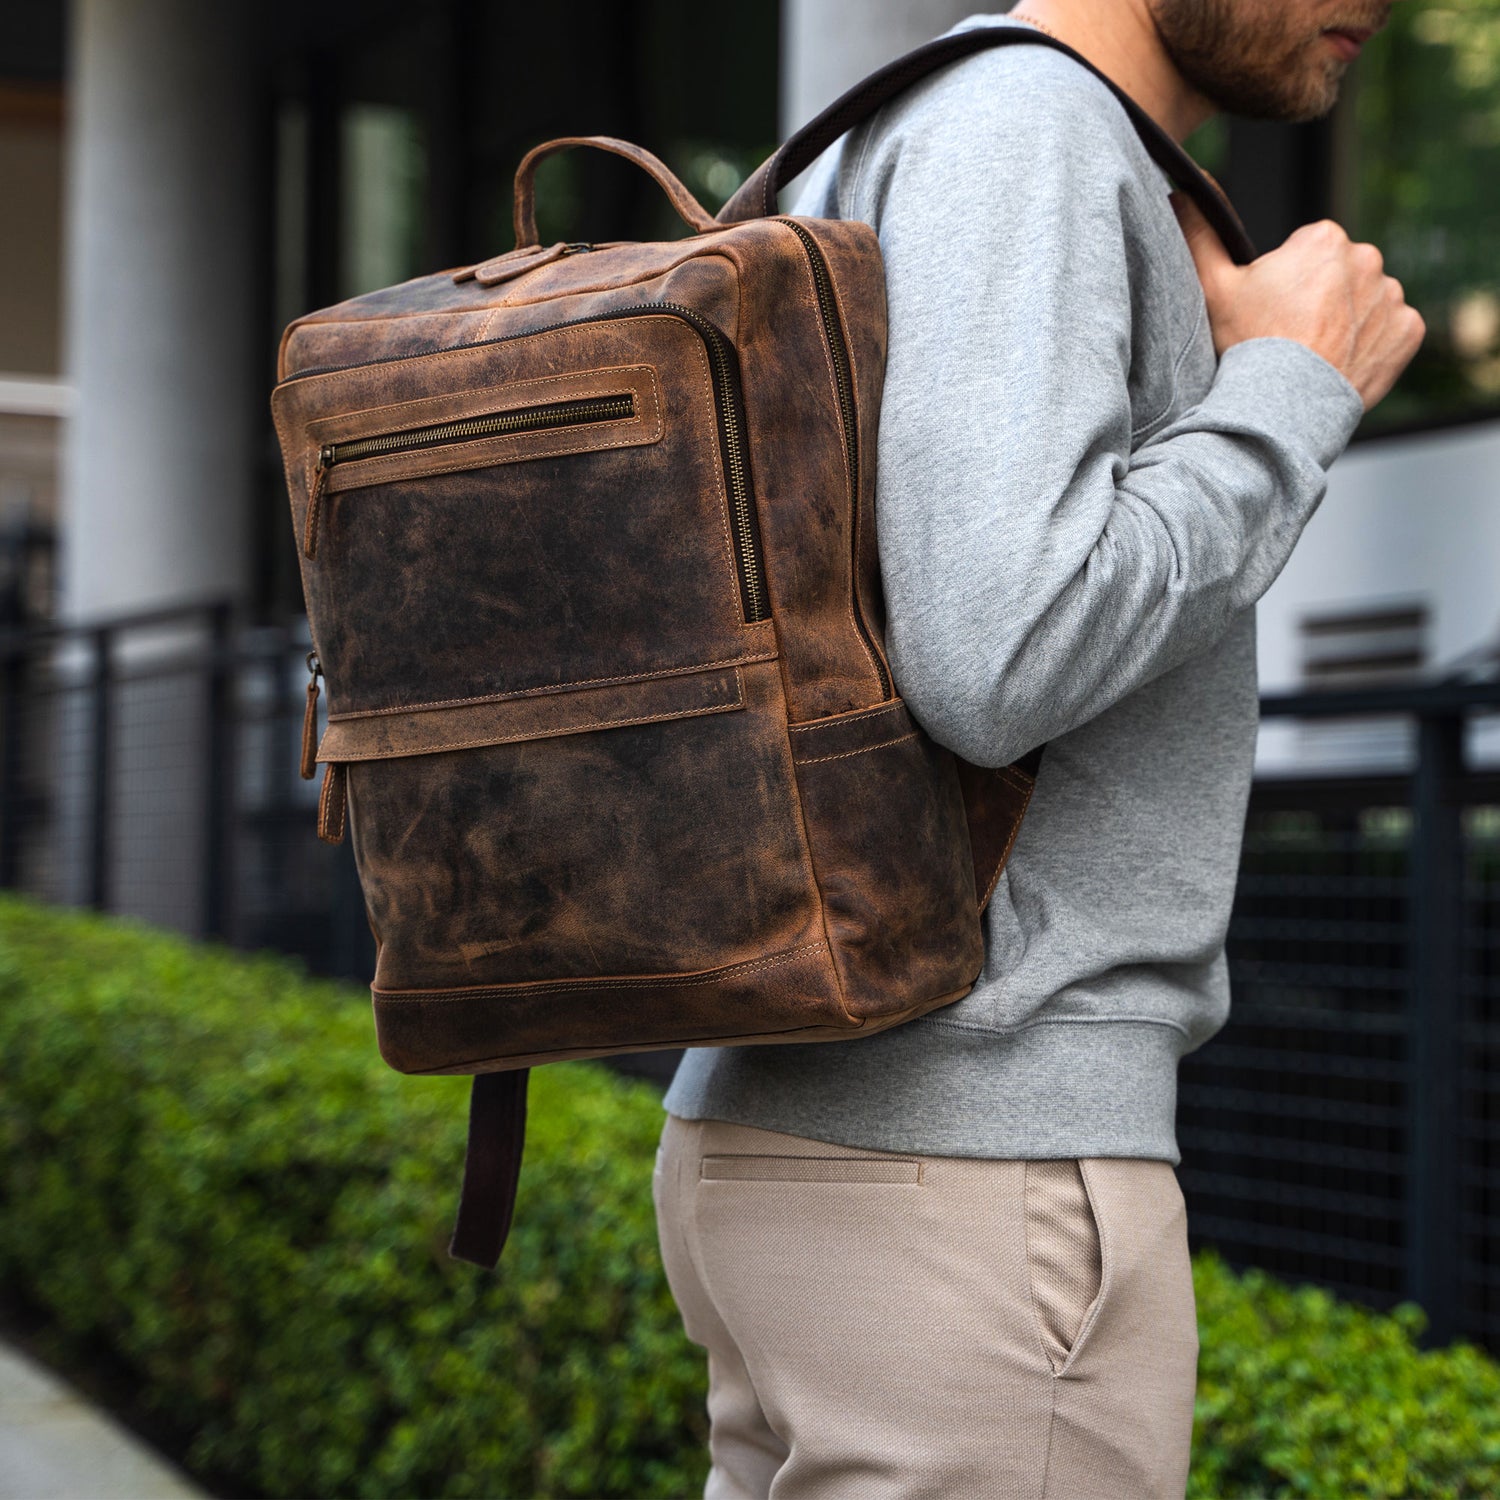 L’Alpin leather backpack